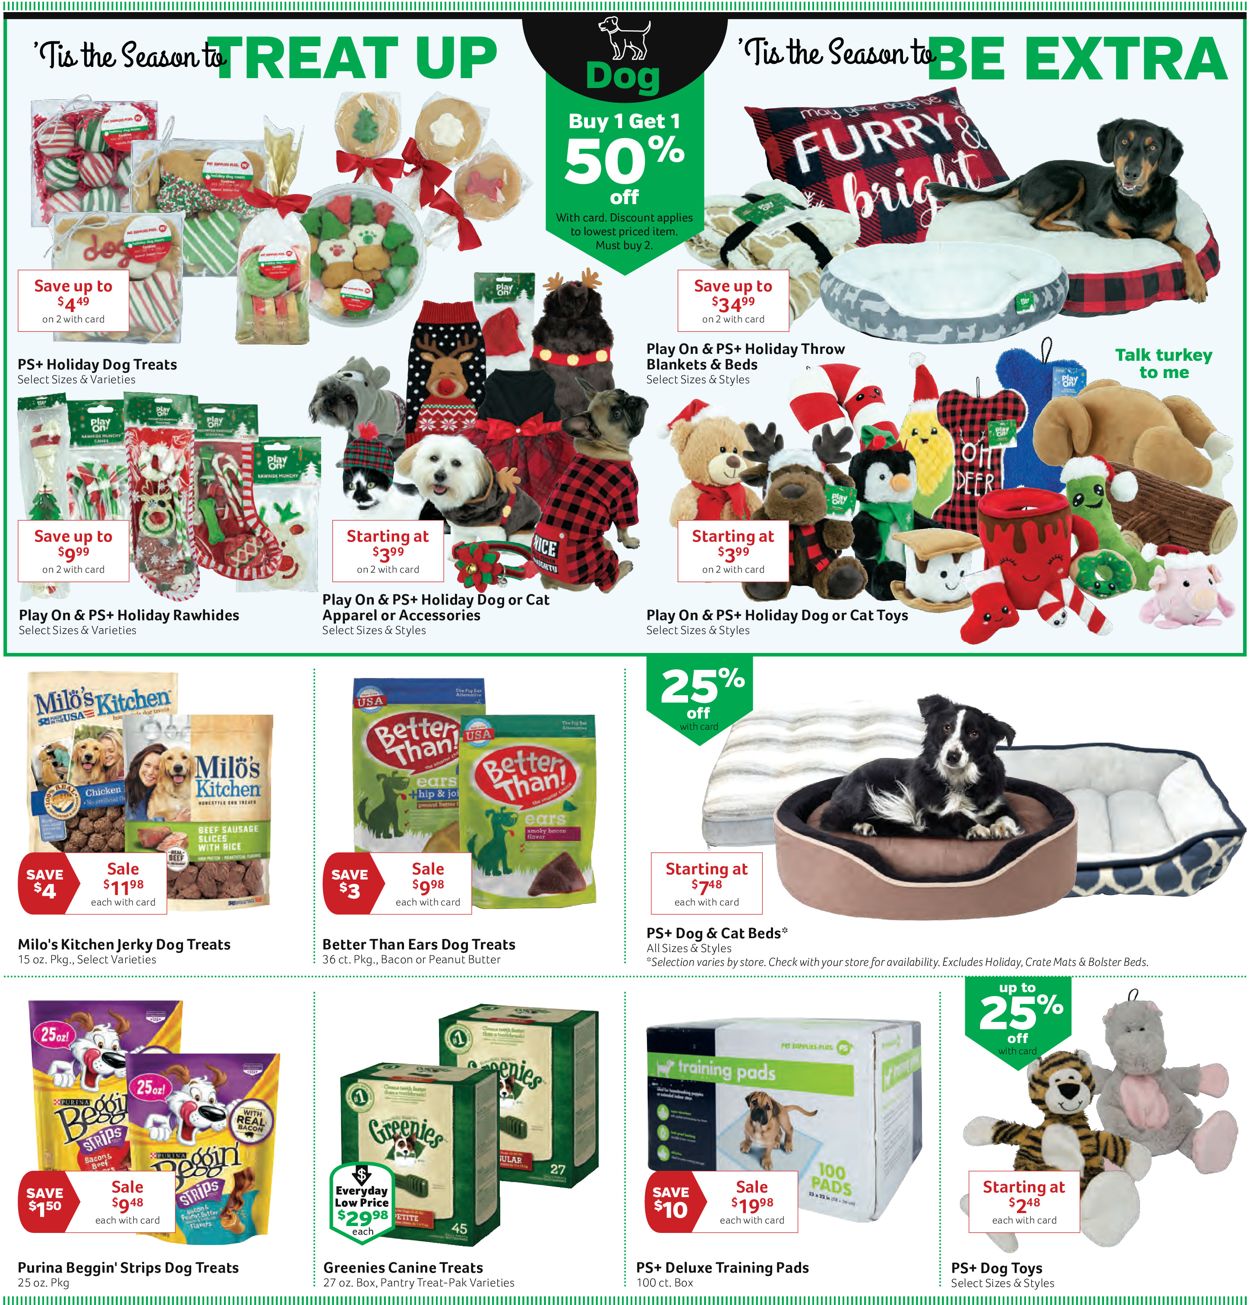 Pet Supplies Plus Current weekly ad 10/24 12/01/2019 [2] frequent